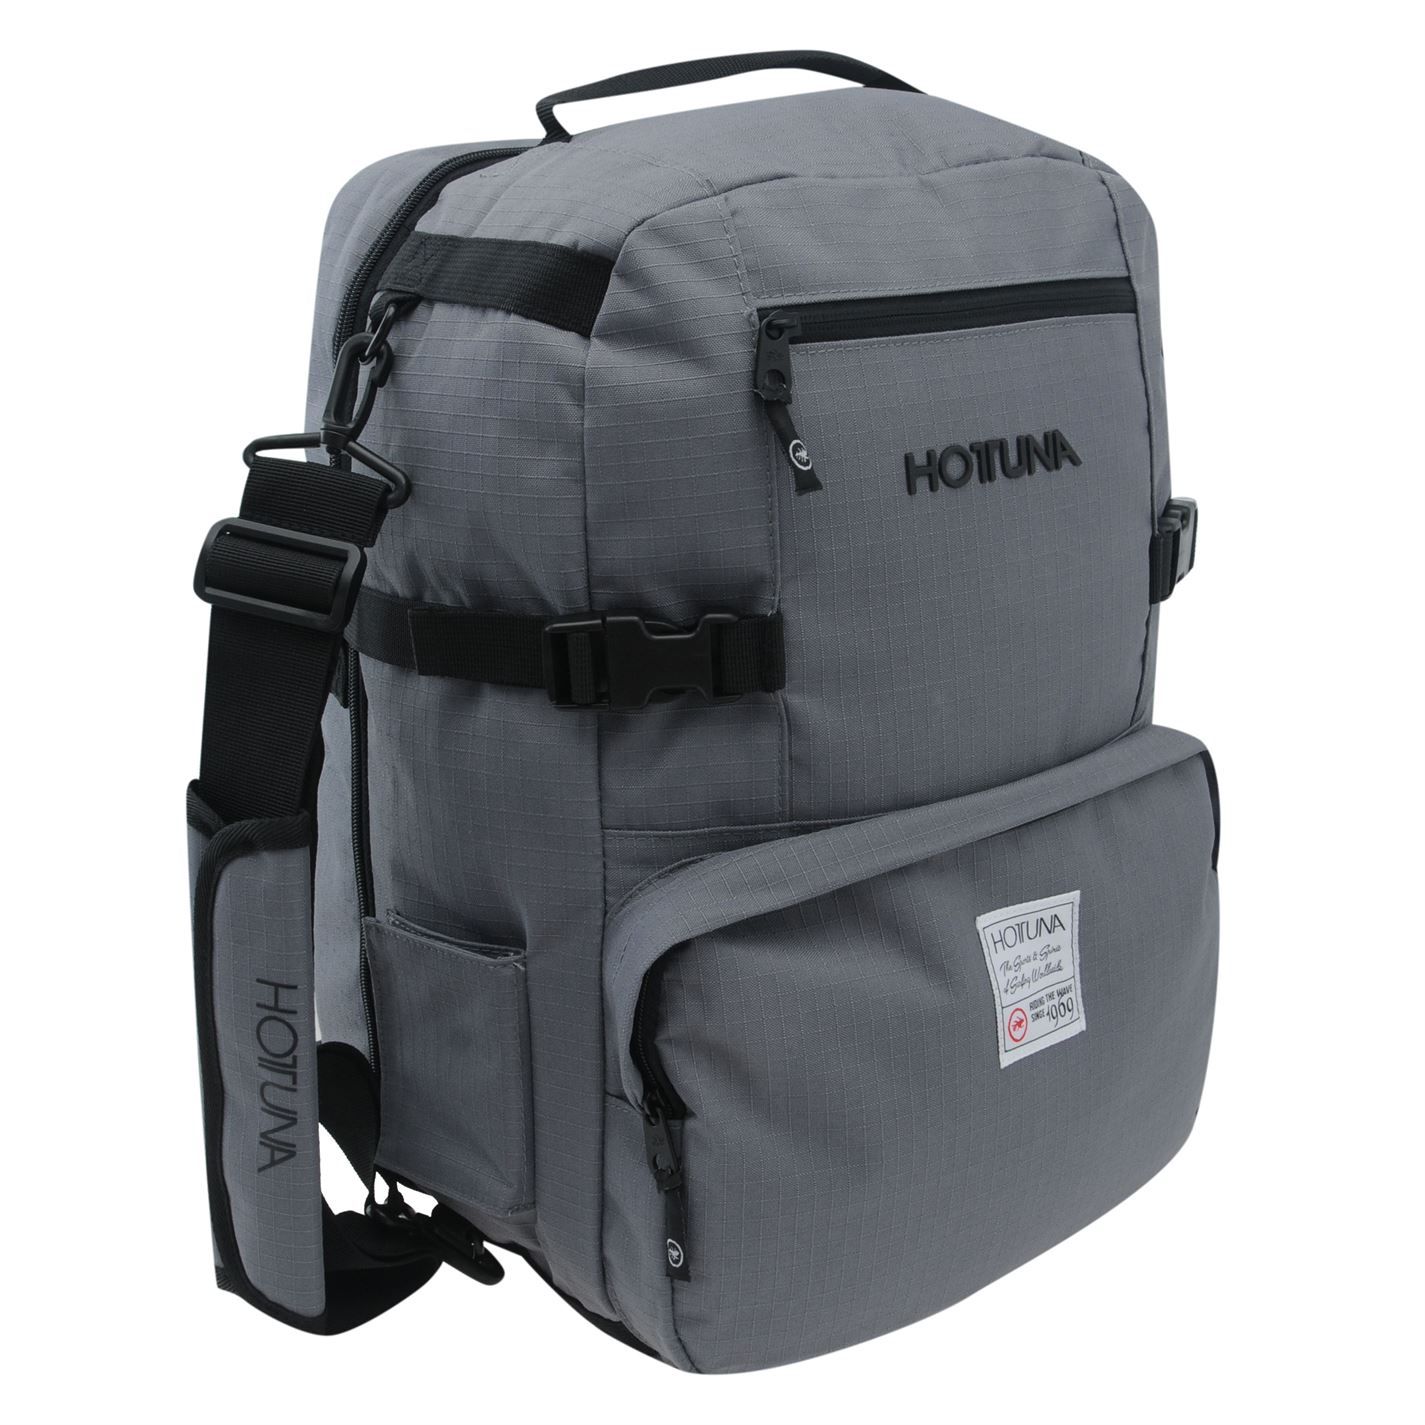 <strong> Hot Tuna Mini Travel Backpack </strong><br><br> This Hot Tuna Mini Travel Backpack, features a padded back with a adjustable straps that feature a clip fastening to the middle for a secure fit. This Backpack also features clip fastenings to the sides for compression when needed as well as a zipped fastening to secure all of your items safely.<br>> Backpack<br>> Adjustable straps<br>> Clip fastening<br>> Clip adjustments<br>> Zipped fastenings<br>> Padded back<br>> Adjustable straps<br>> Hot Tuna branding<br>> H46 x W28 x D16.5cm